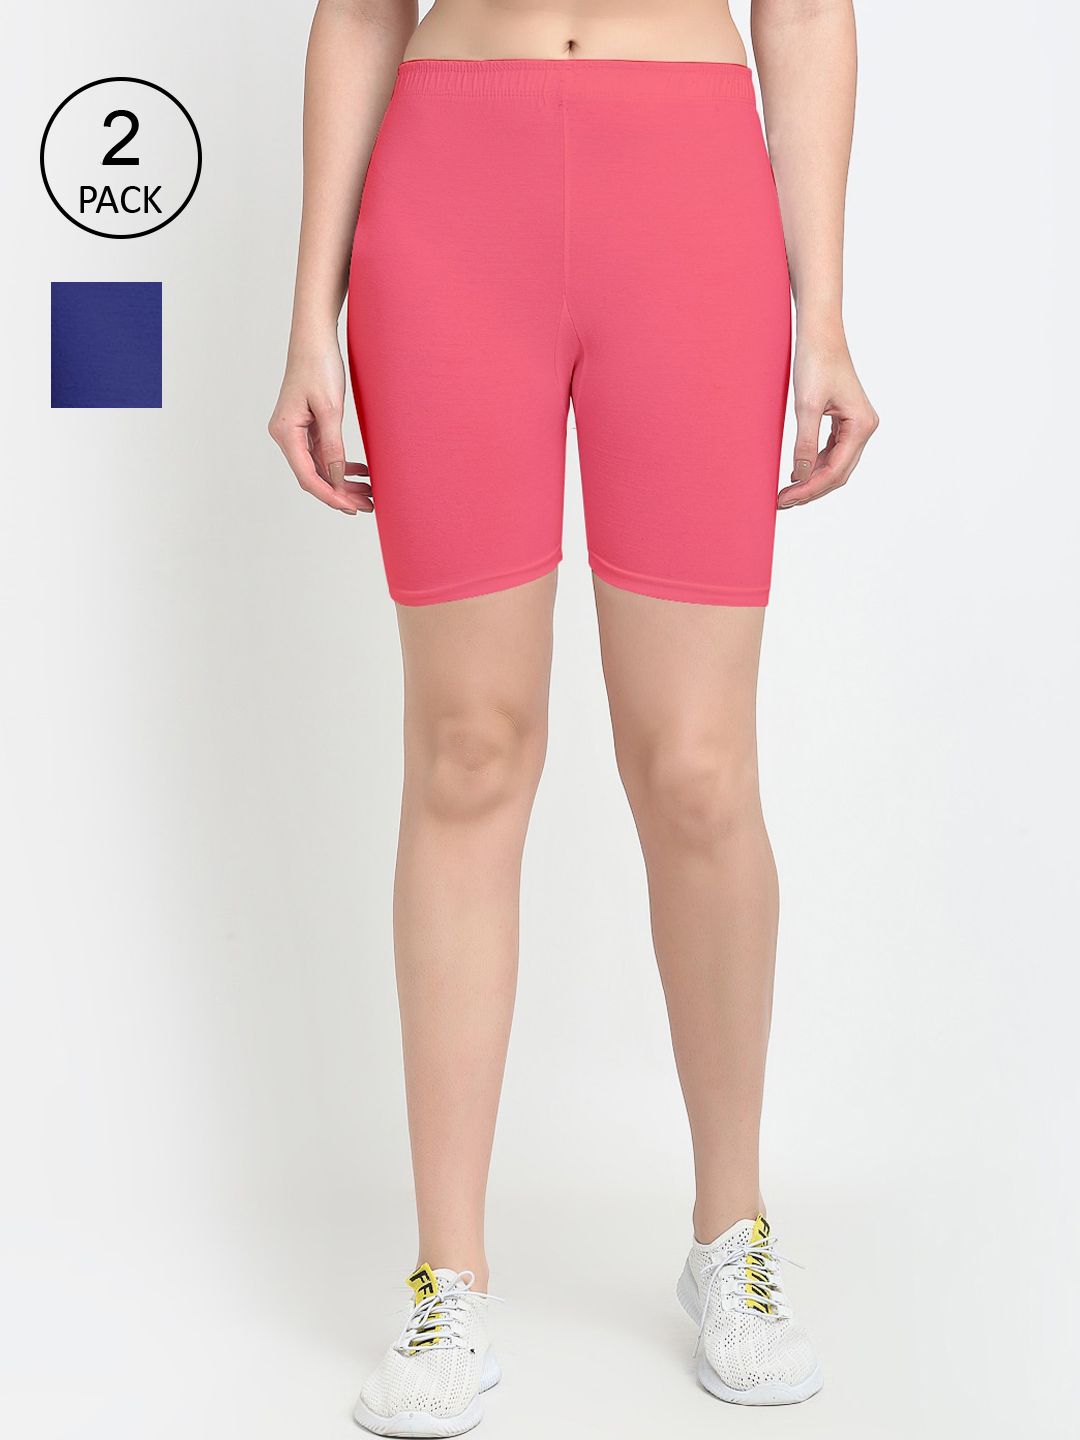 GRACIT Women Set Of 2 Blue & Pink Solid Cotton Shorts Price in India